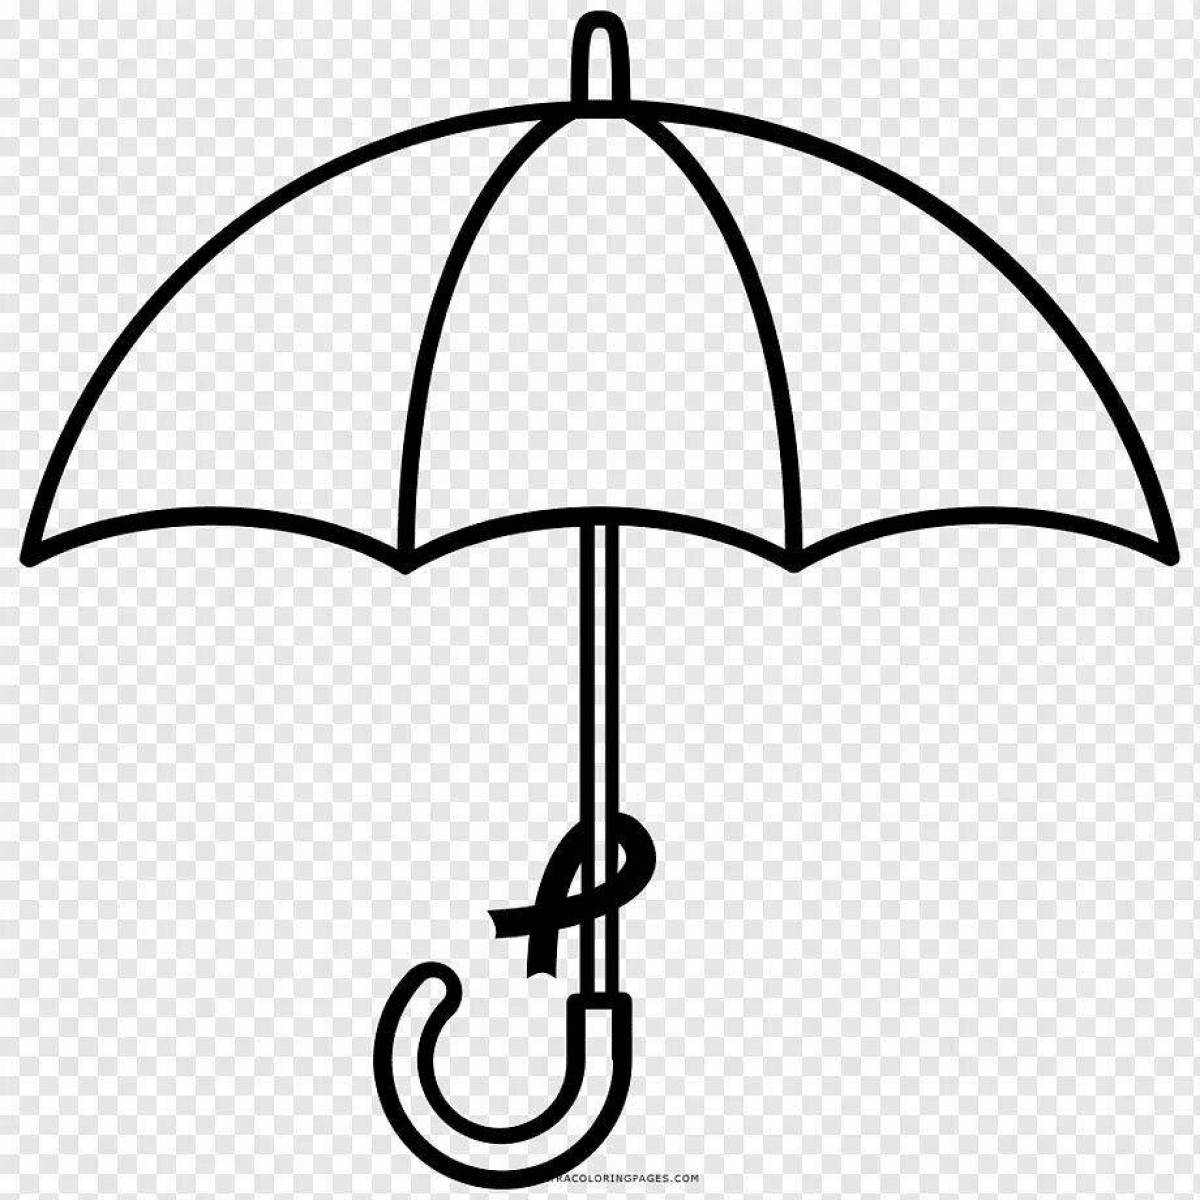 Colorful and colorful and bright umbrella coloring book for kids